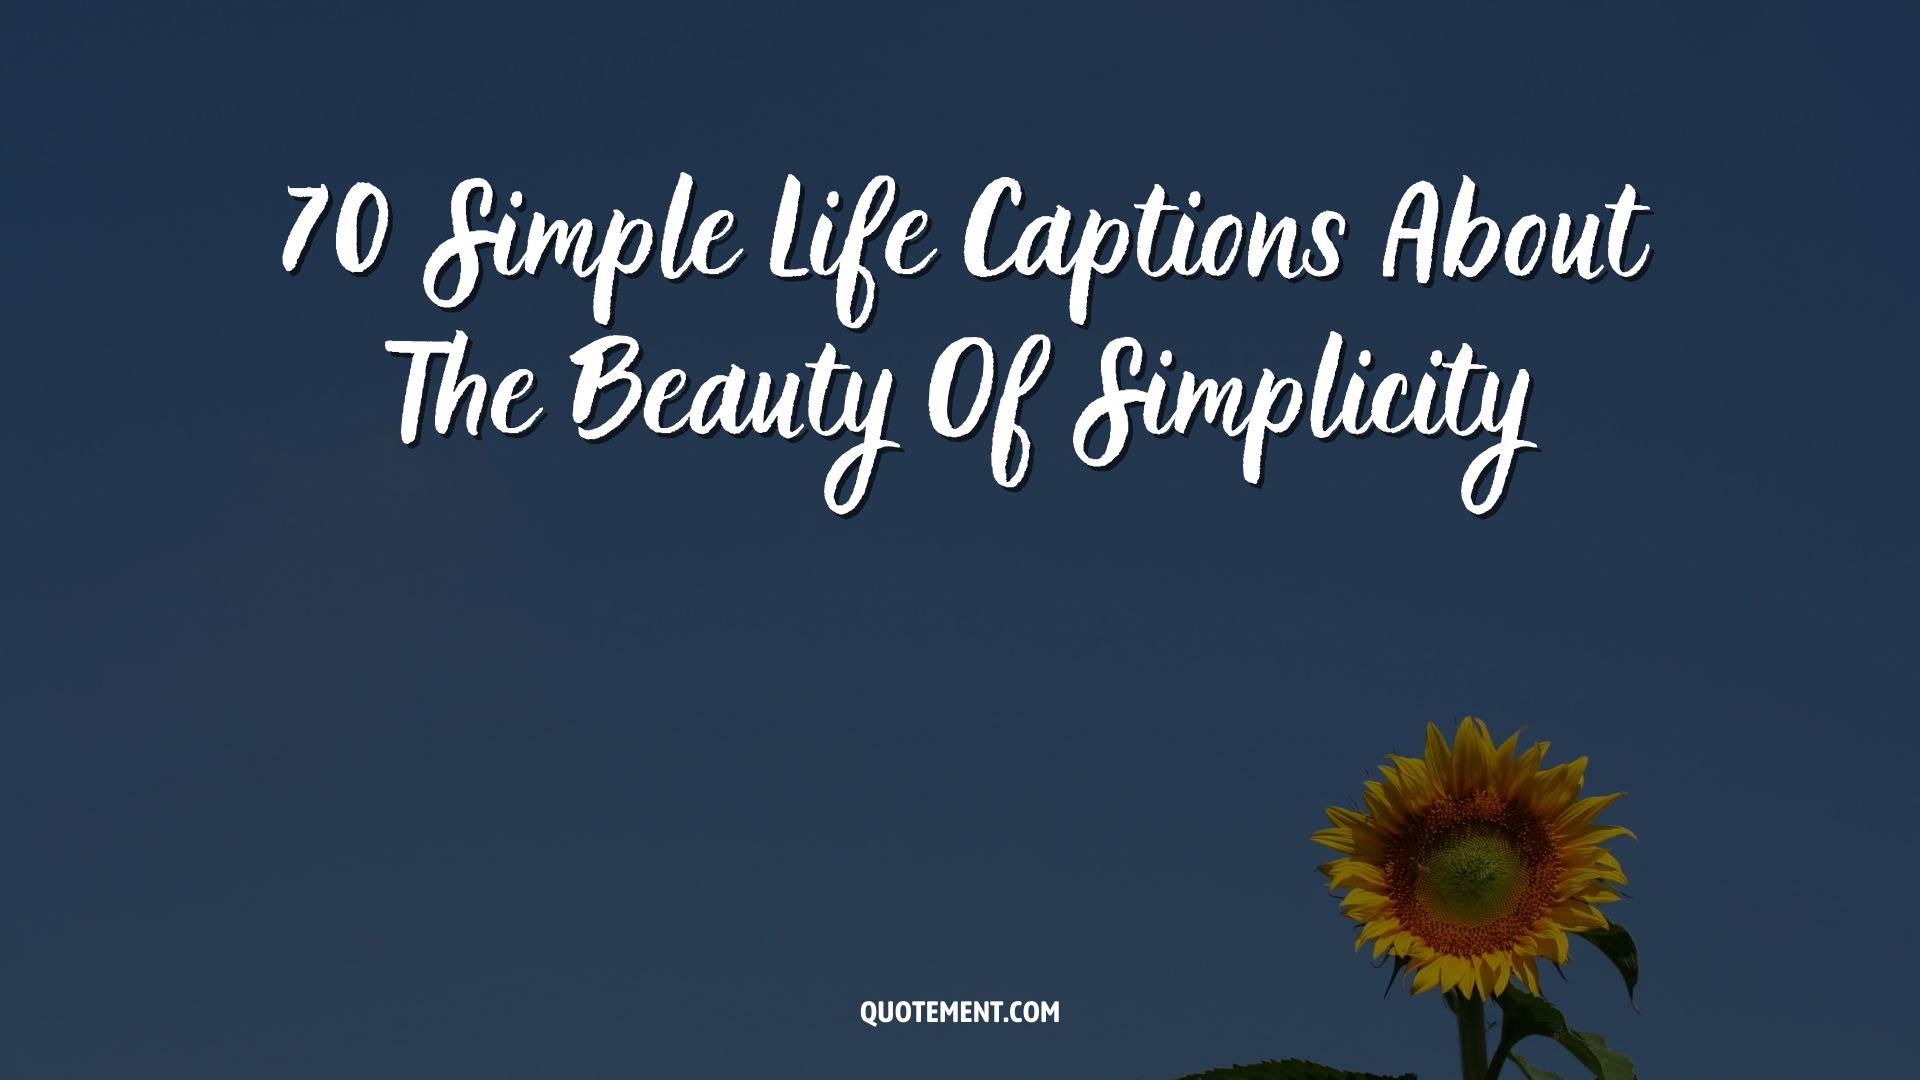 70 Simple Life Captions About The Beauty Of Simplicity